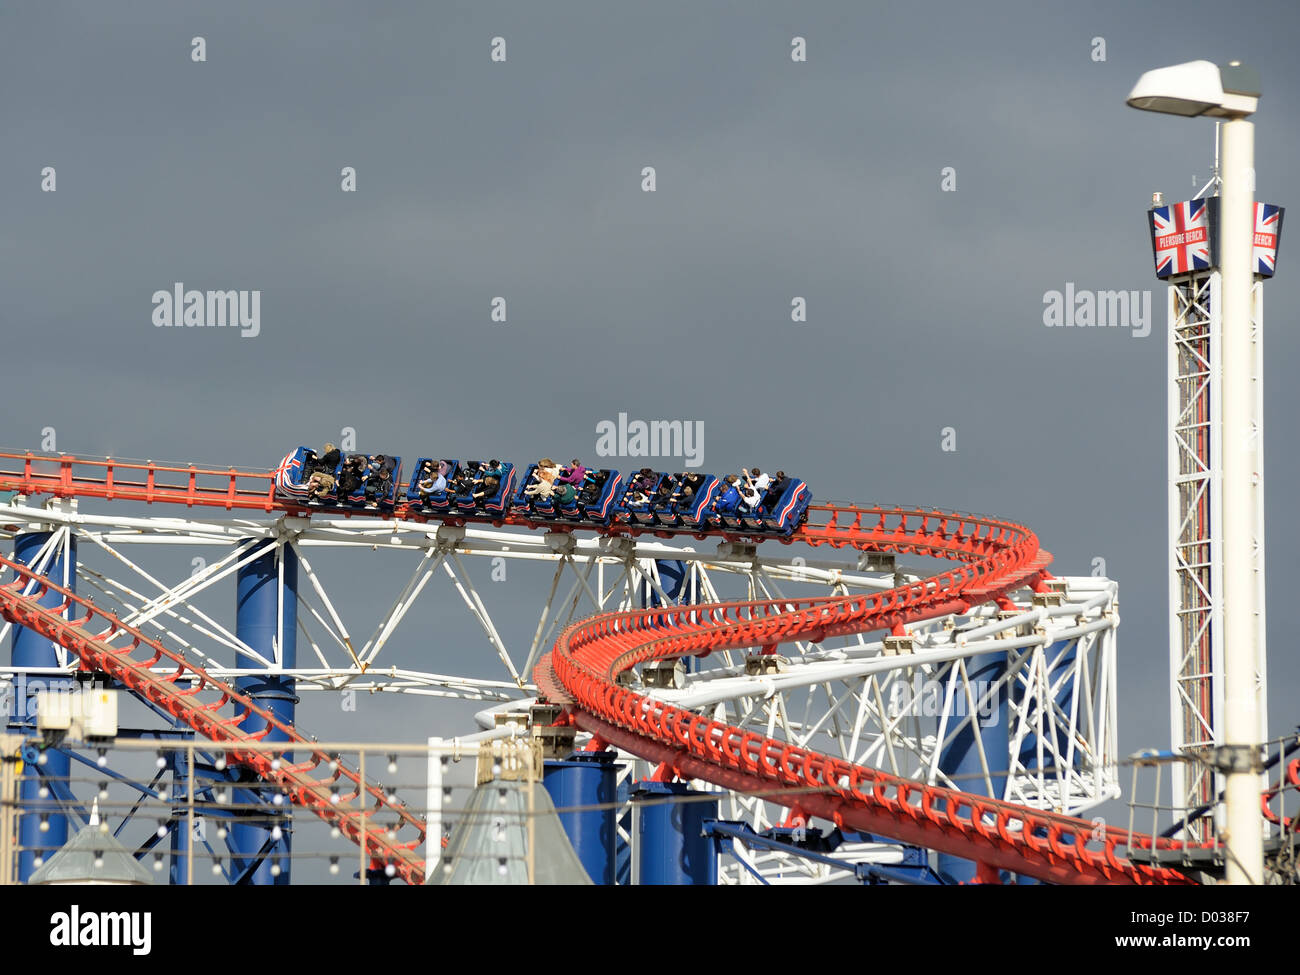 The Big One pepsi max is a steel roller coaster located at the Pleasure  Beach Blackpool Lancashire England uk Stock Photo - Alamy